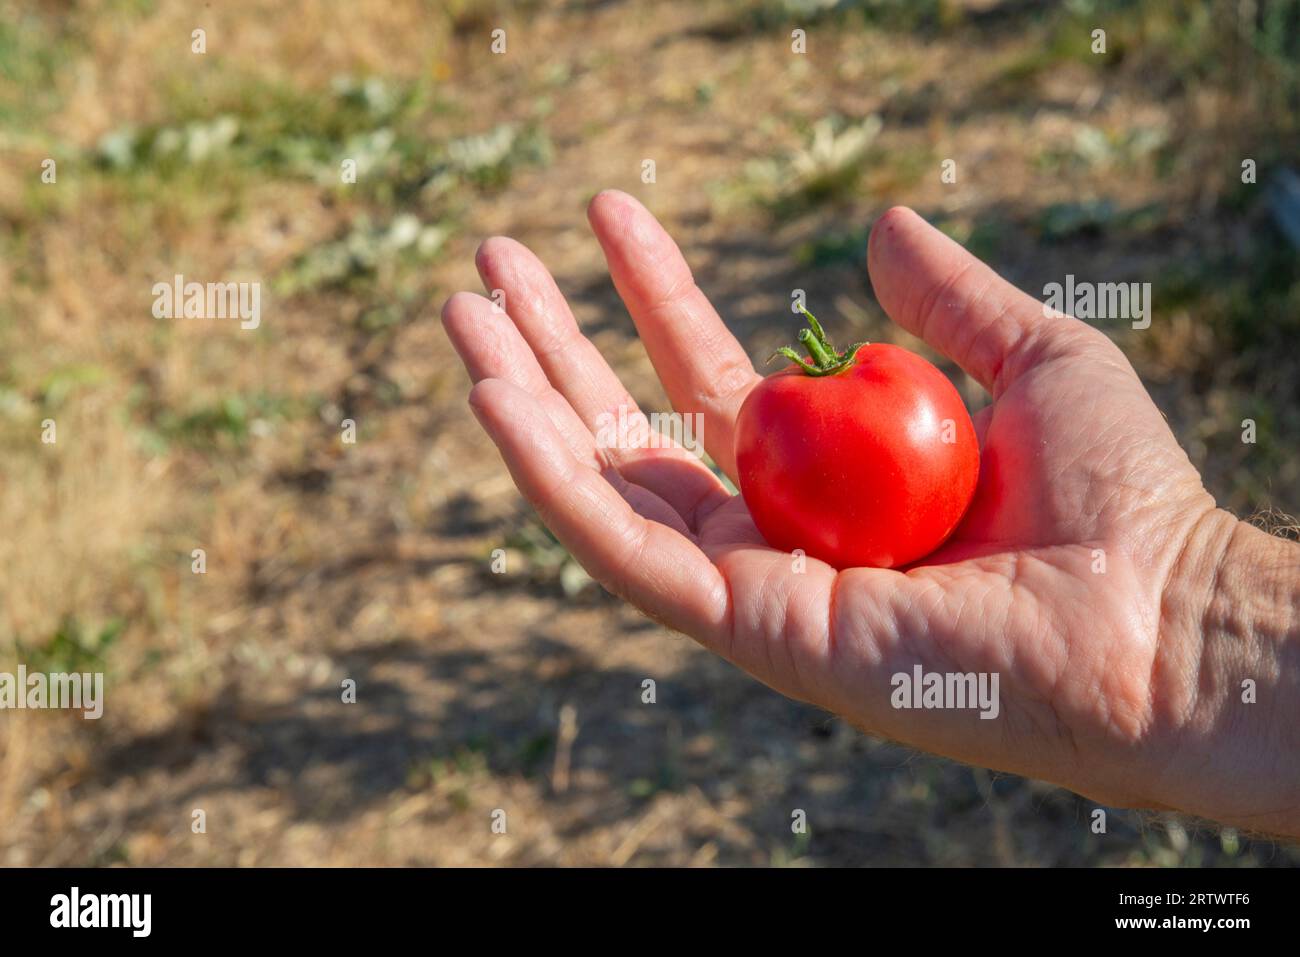 Hand holding a little tomato. Stock Photo